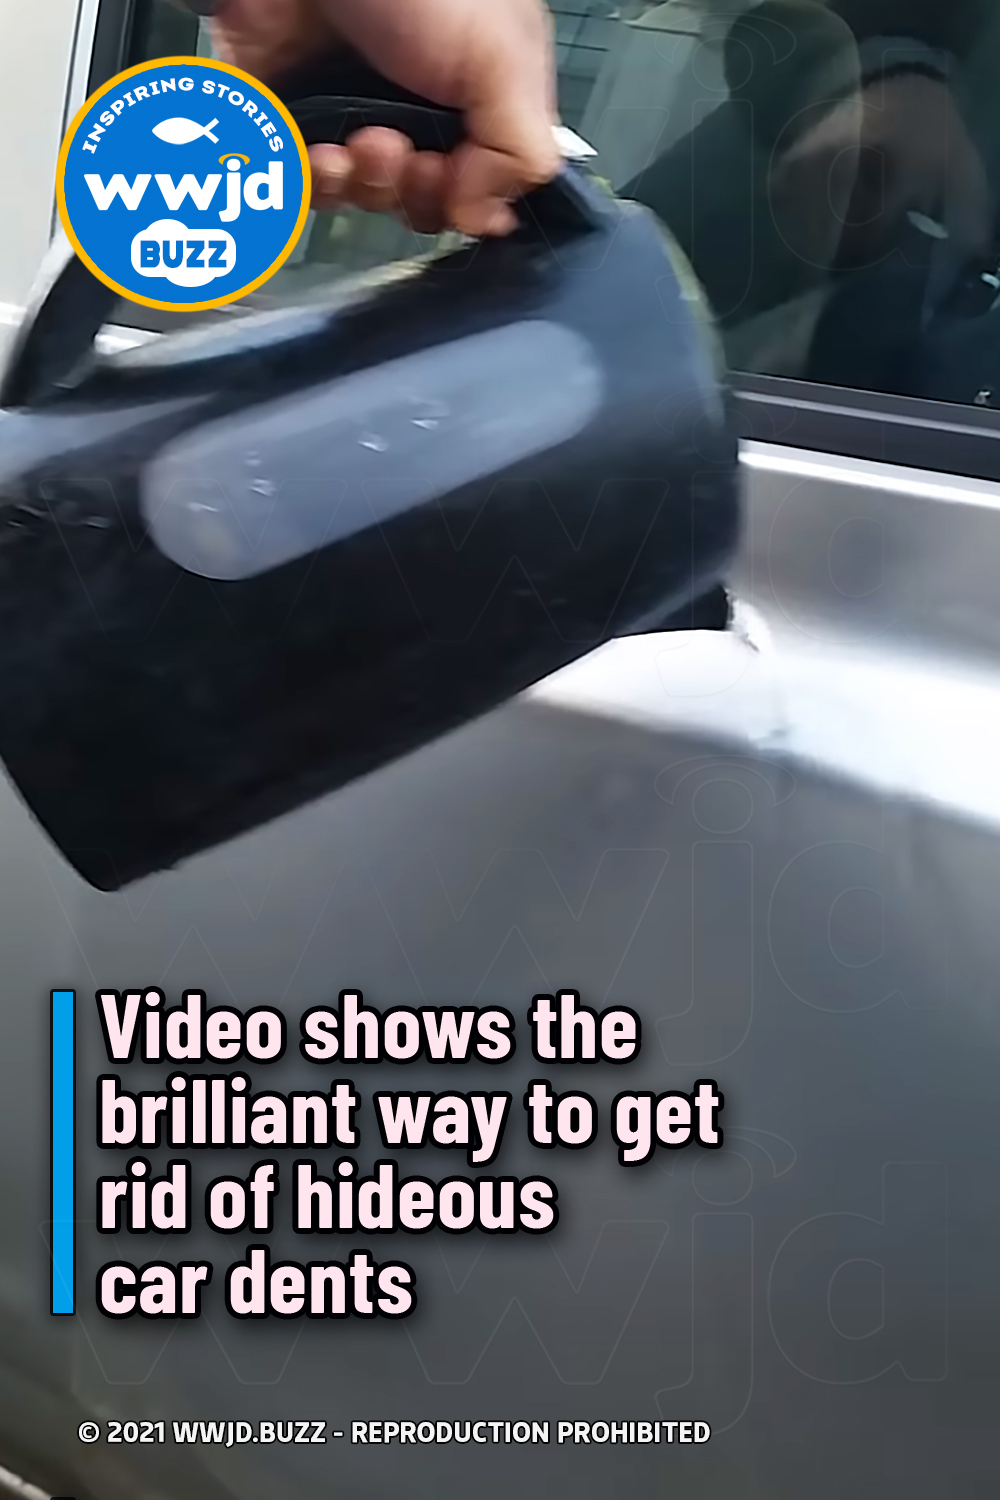 Video shows the brilliant way to get rid of hideous car dents